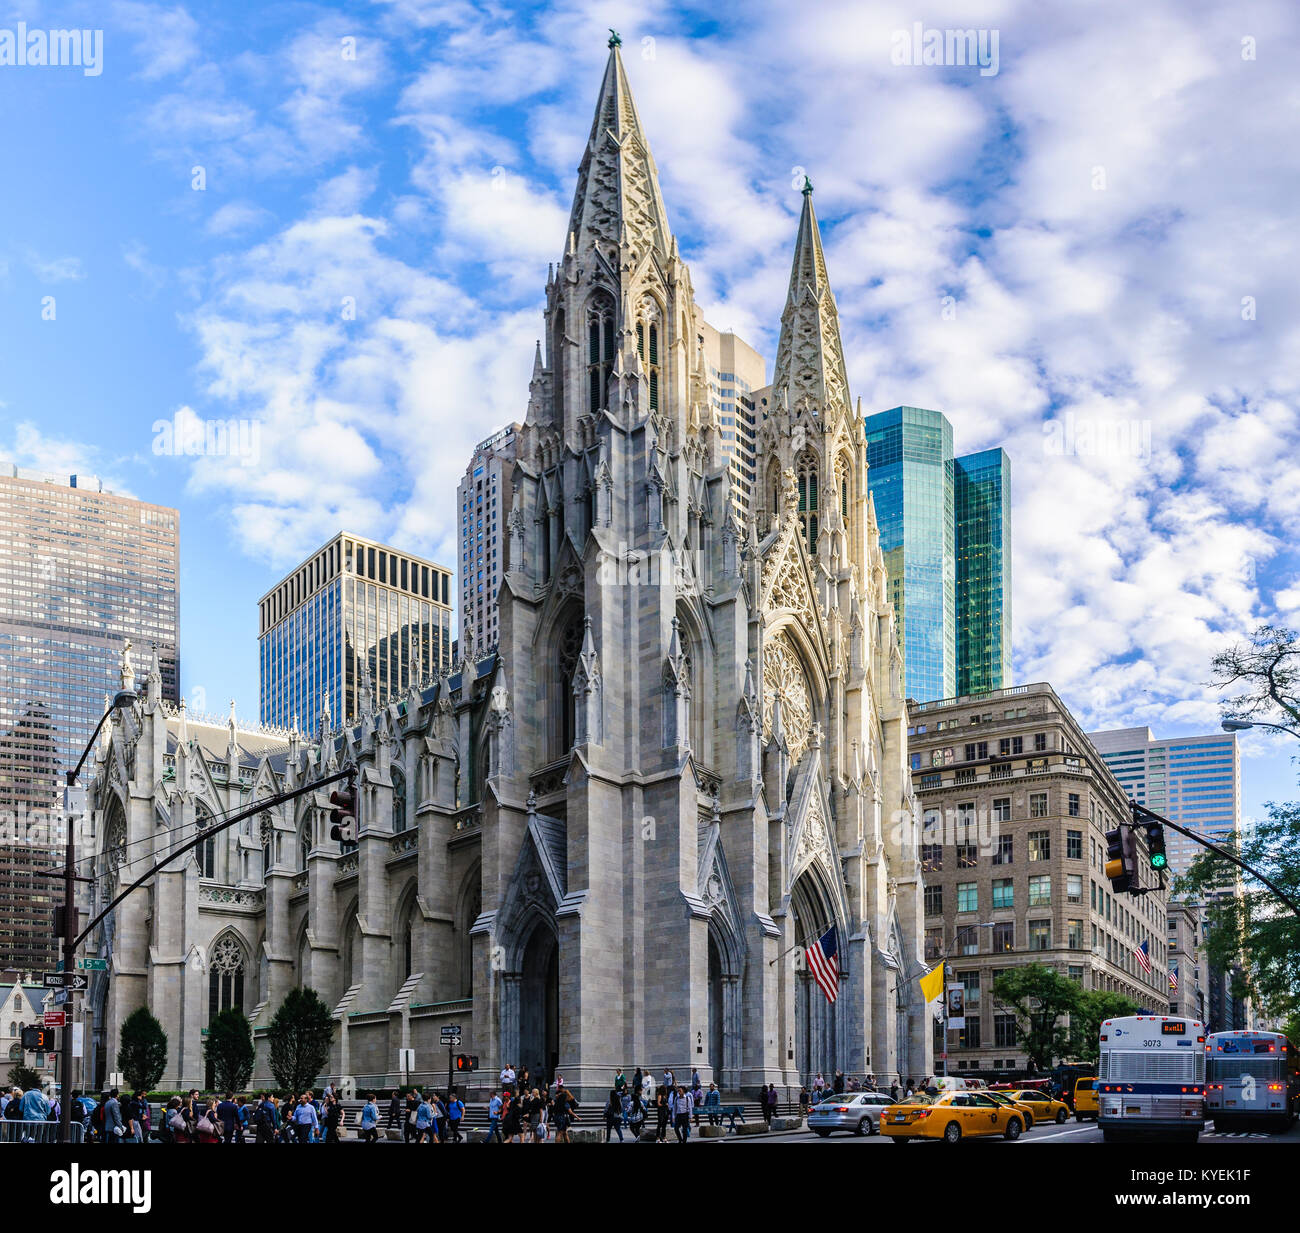 The famous St. Patrick's Church on 5th Ave in New York, USA Stock Photo